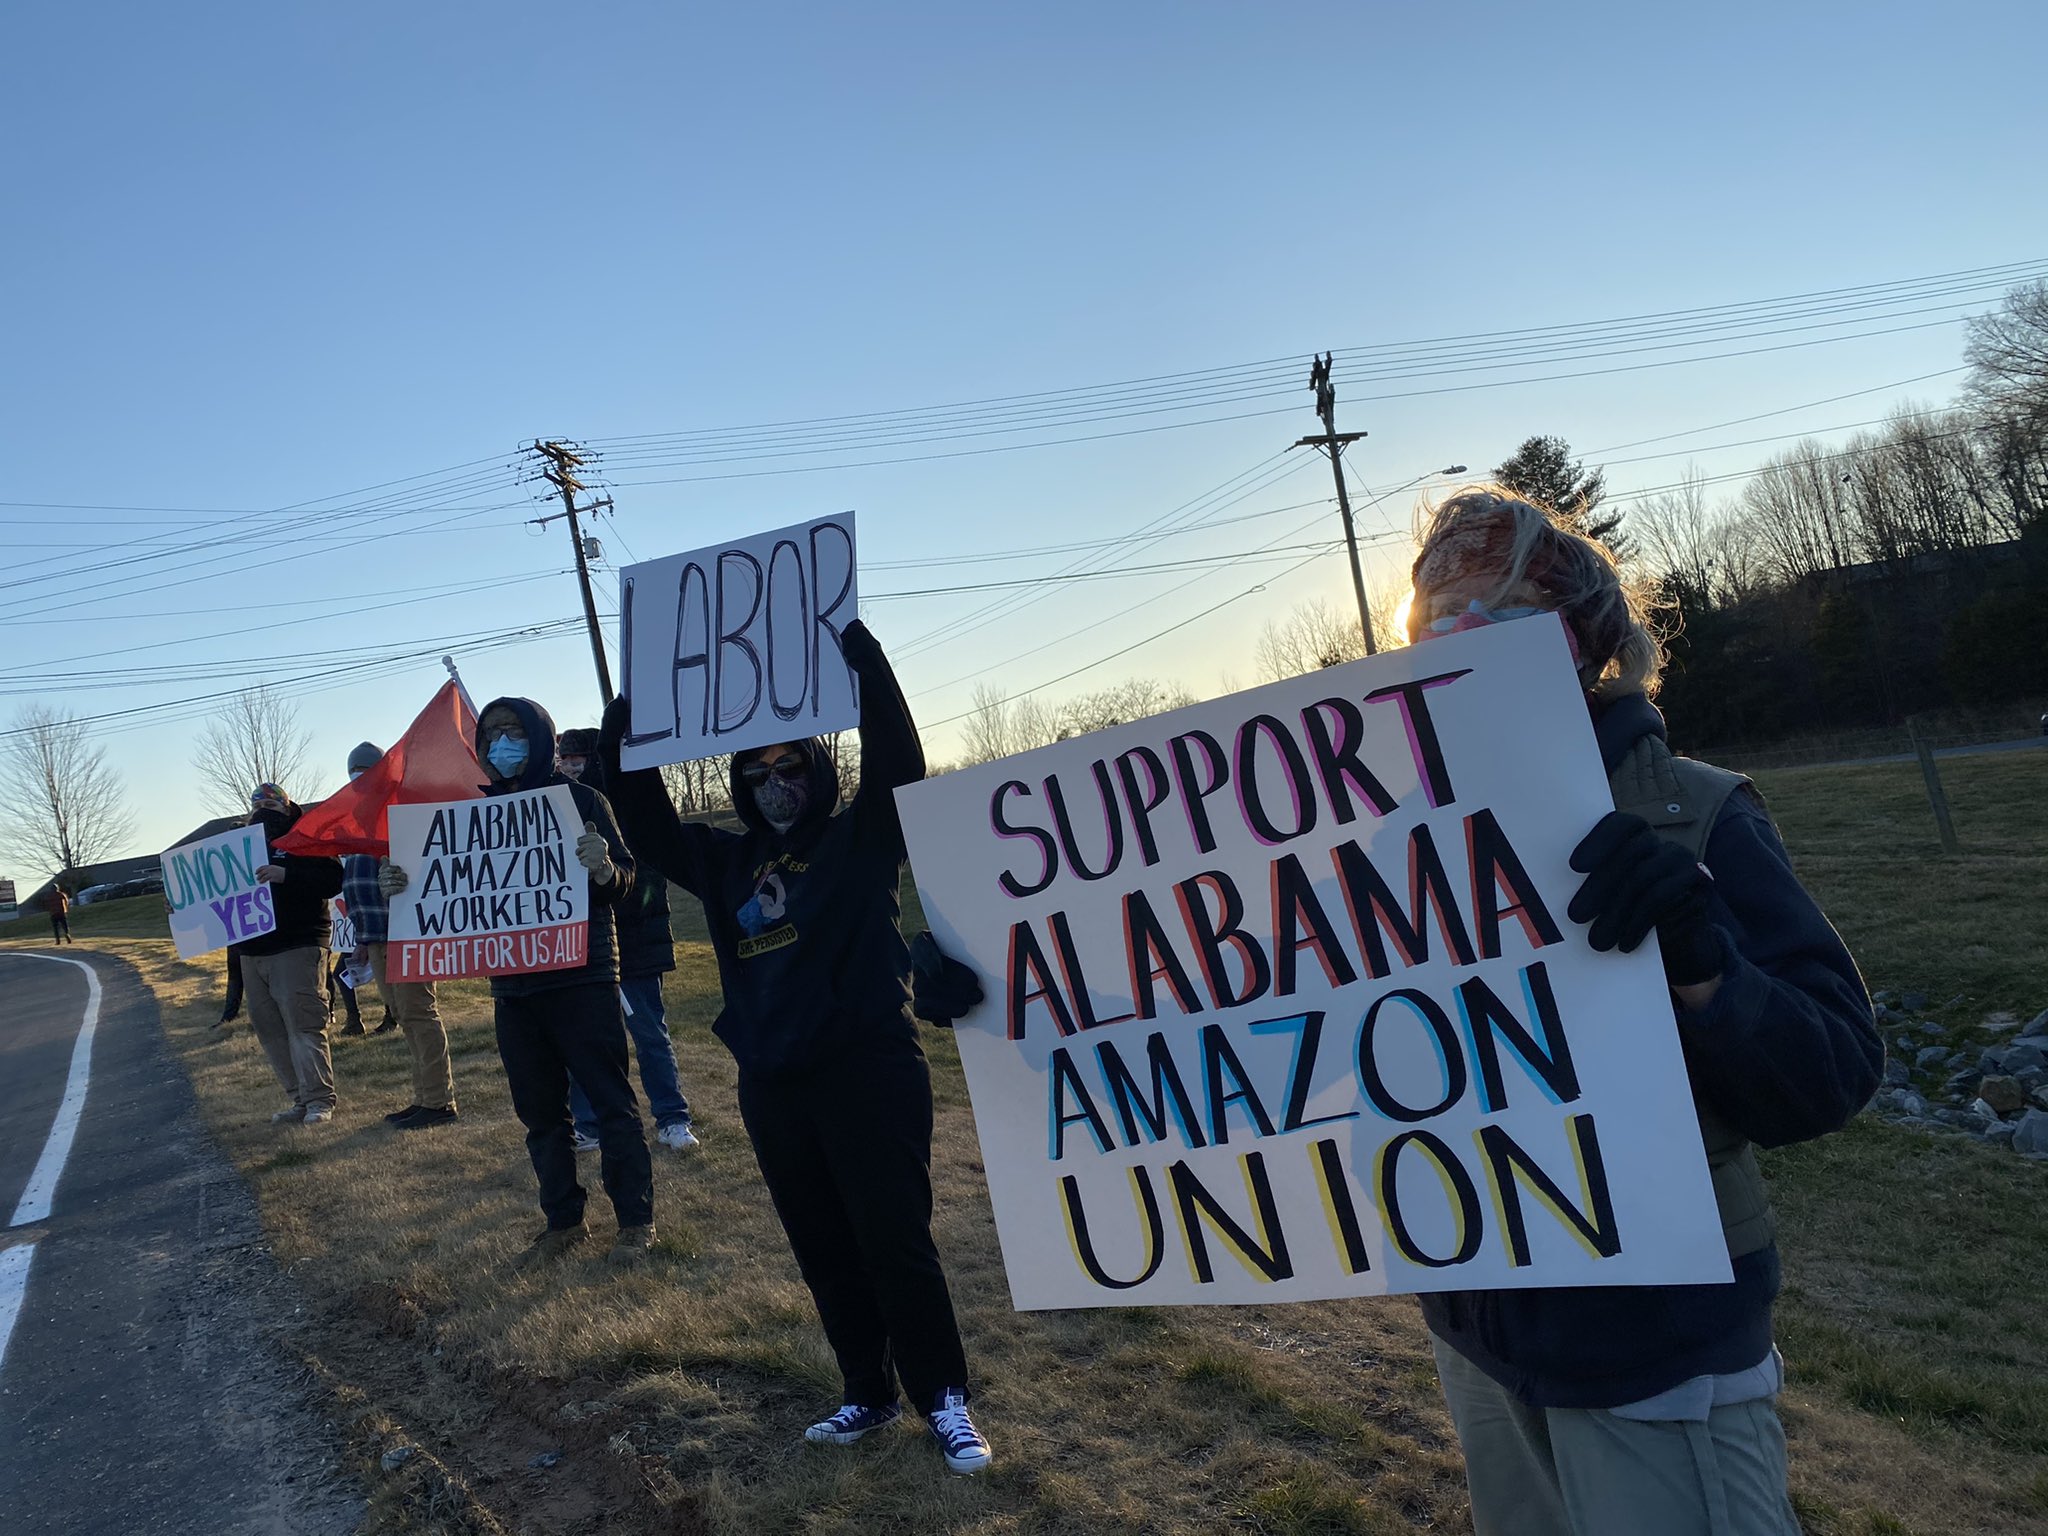 The photo shows people holding signs in support of Alabama Amazon workers.